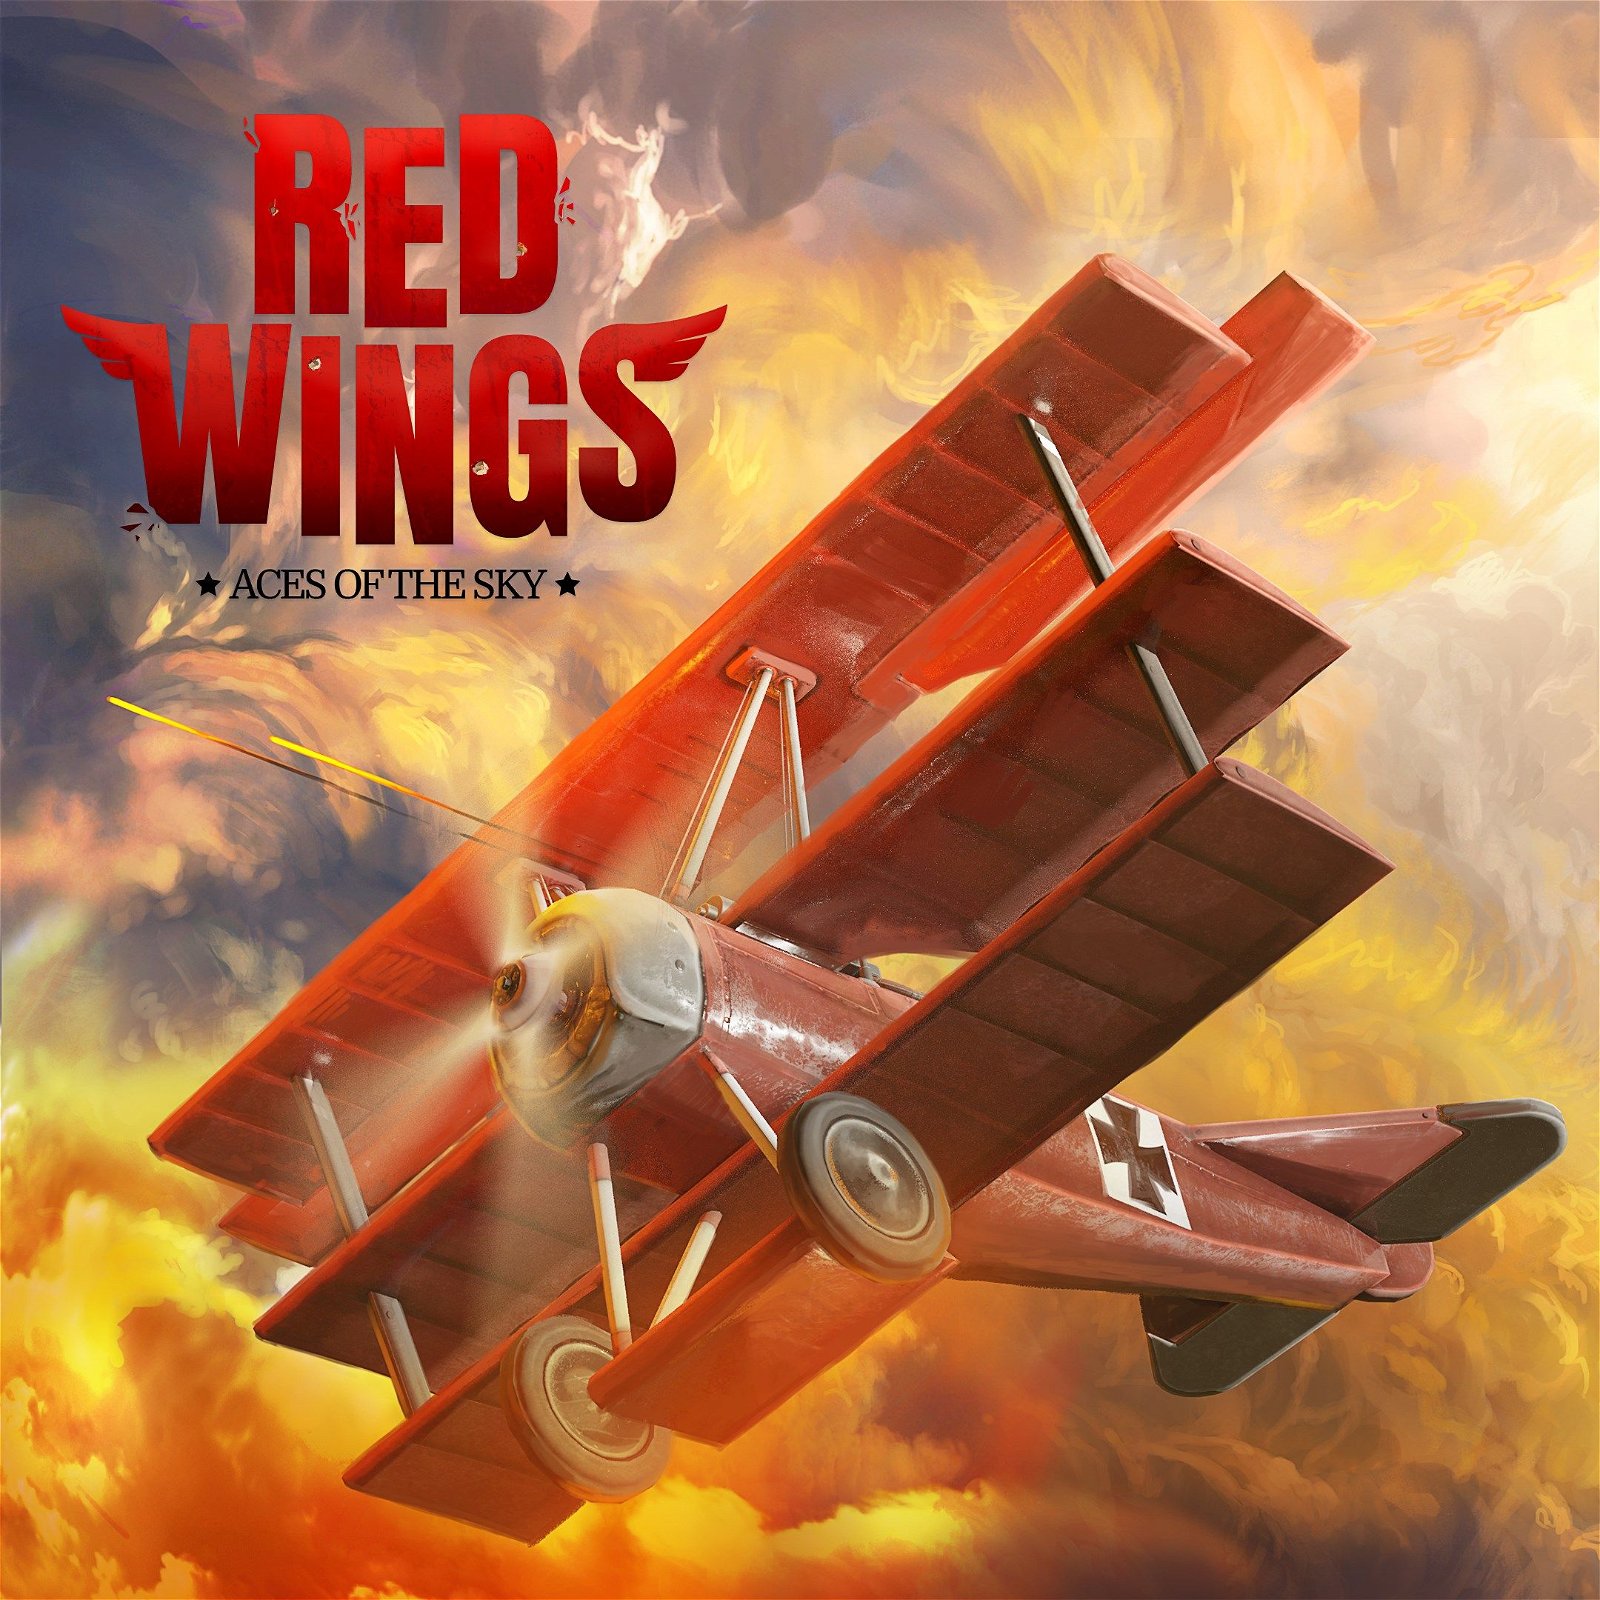 Image of Red Wings: Aces of the Sky